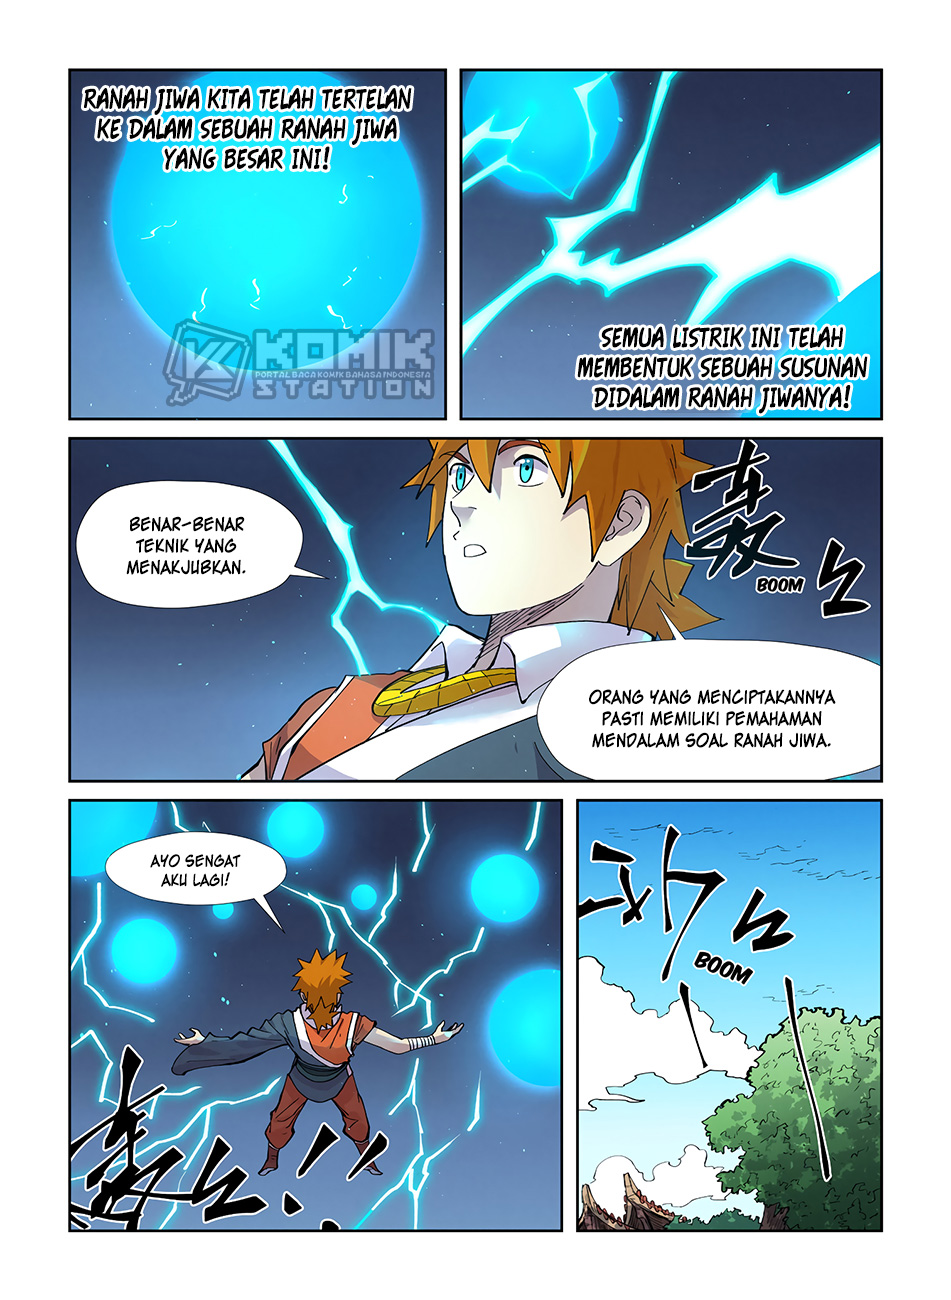 Tales of Demons and Gods Chapter 243-5